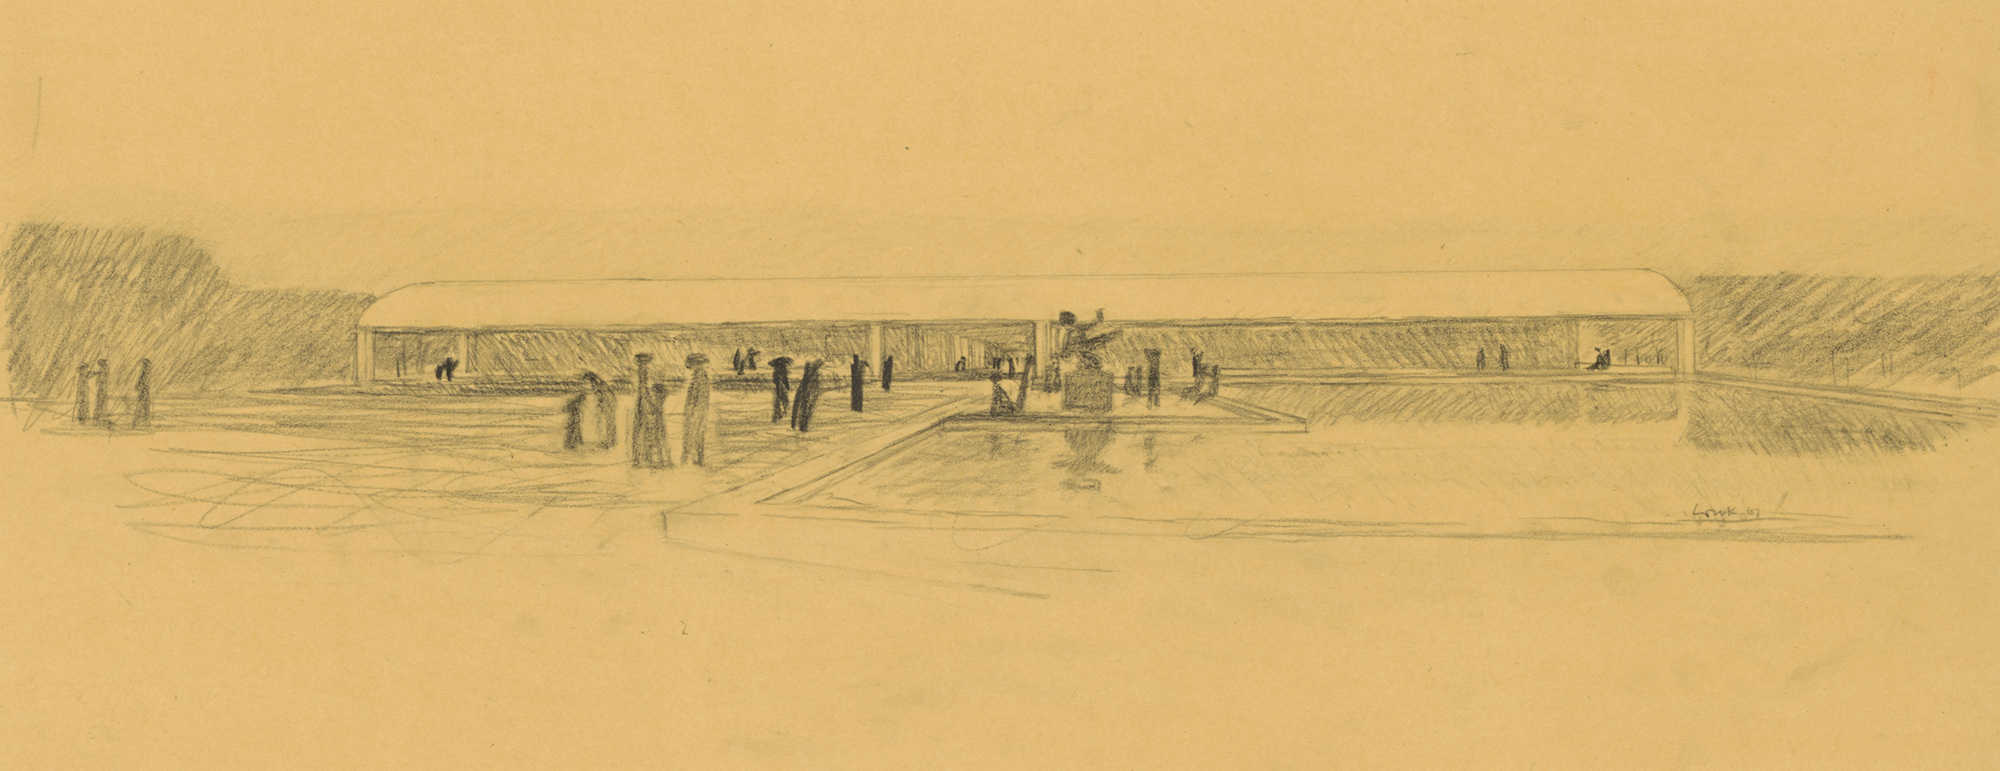 Pencil sketch of landscape at Kimbell Art Museum on yellow trace